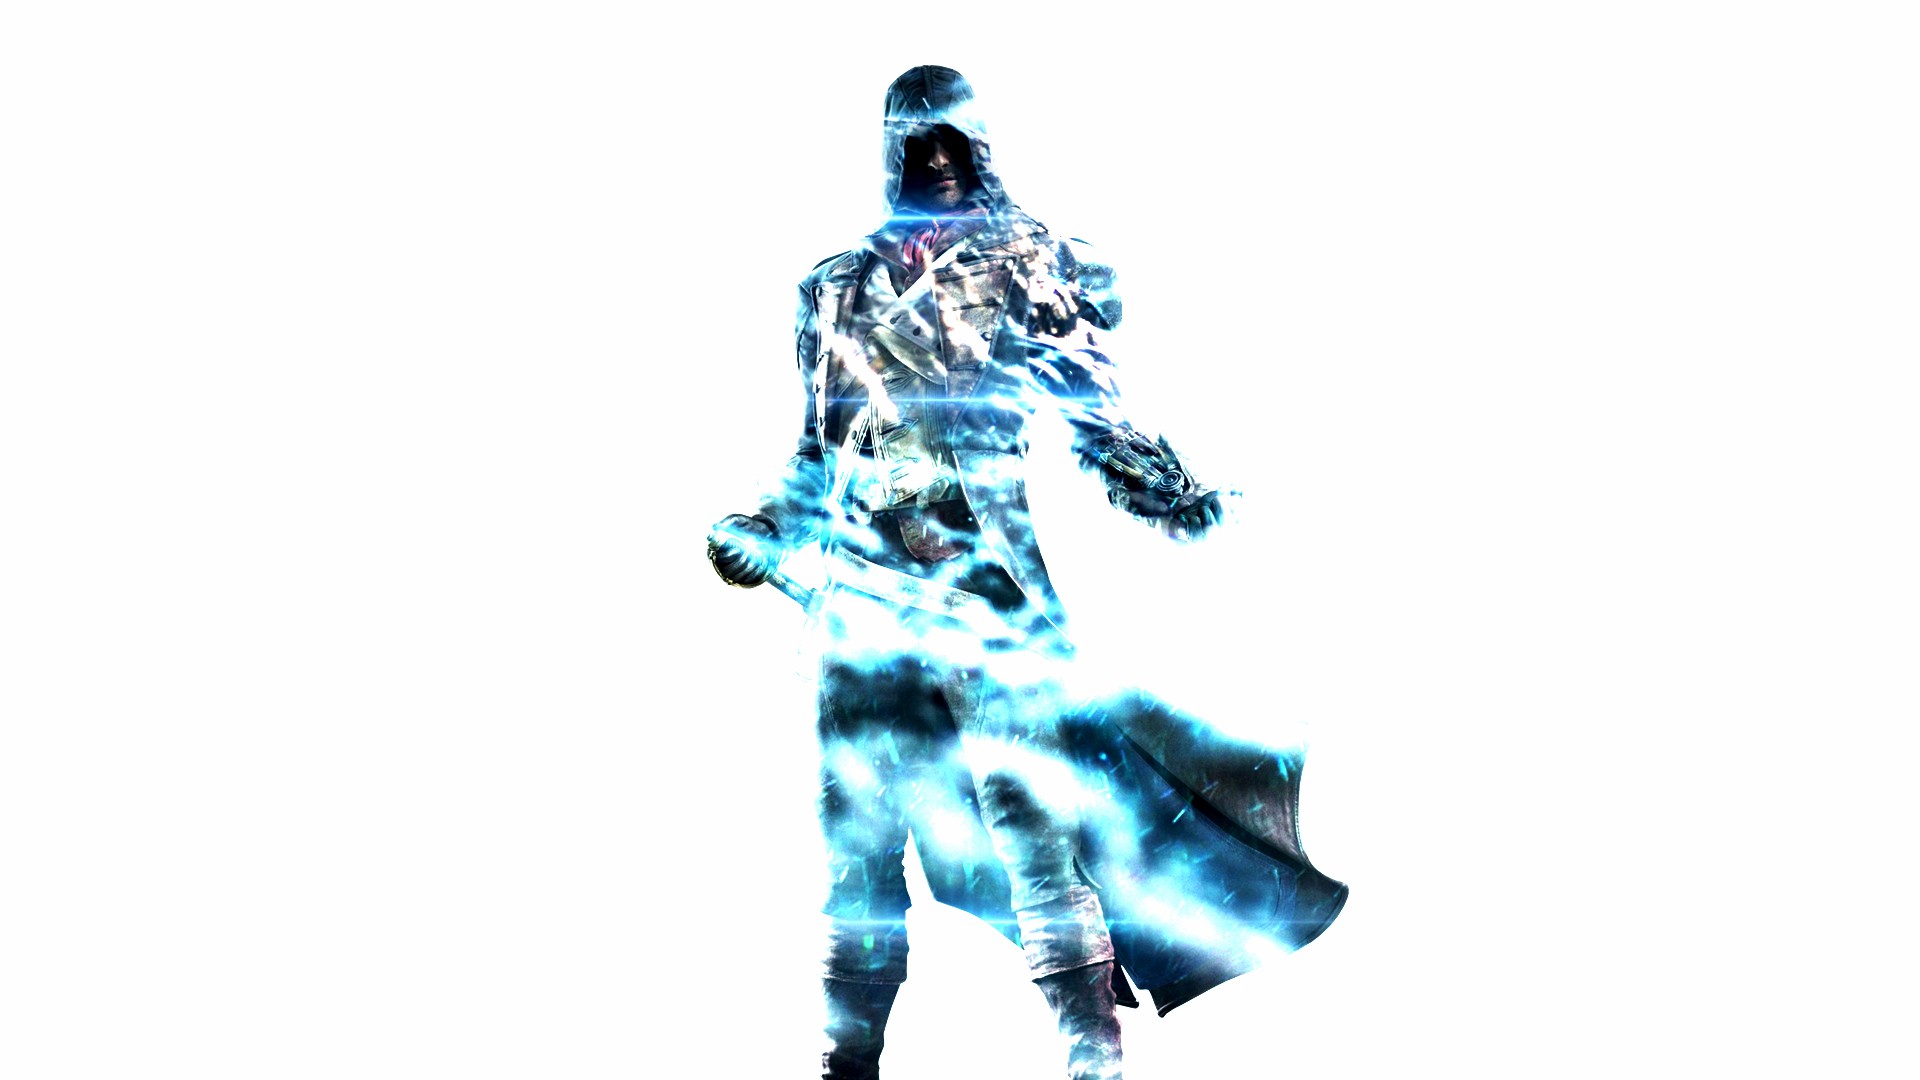 General 1920x1080 Assassin's Creed Unity double exposure water flares white background 2D digital art Arno Dorian cyan